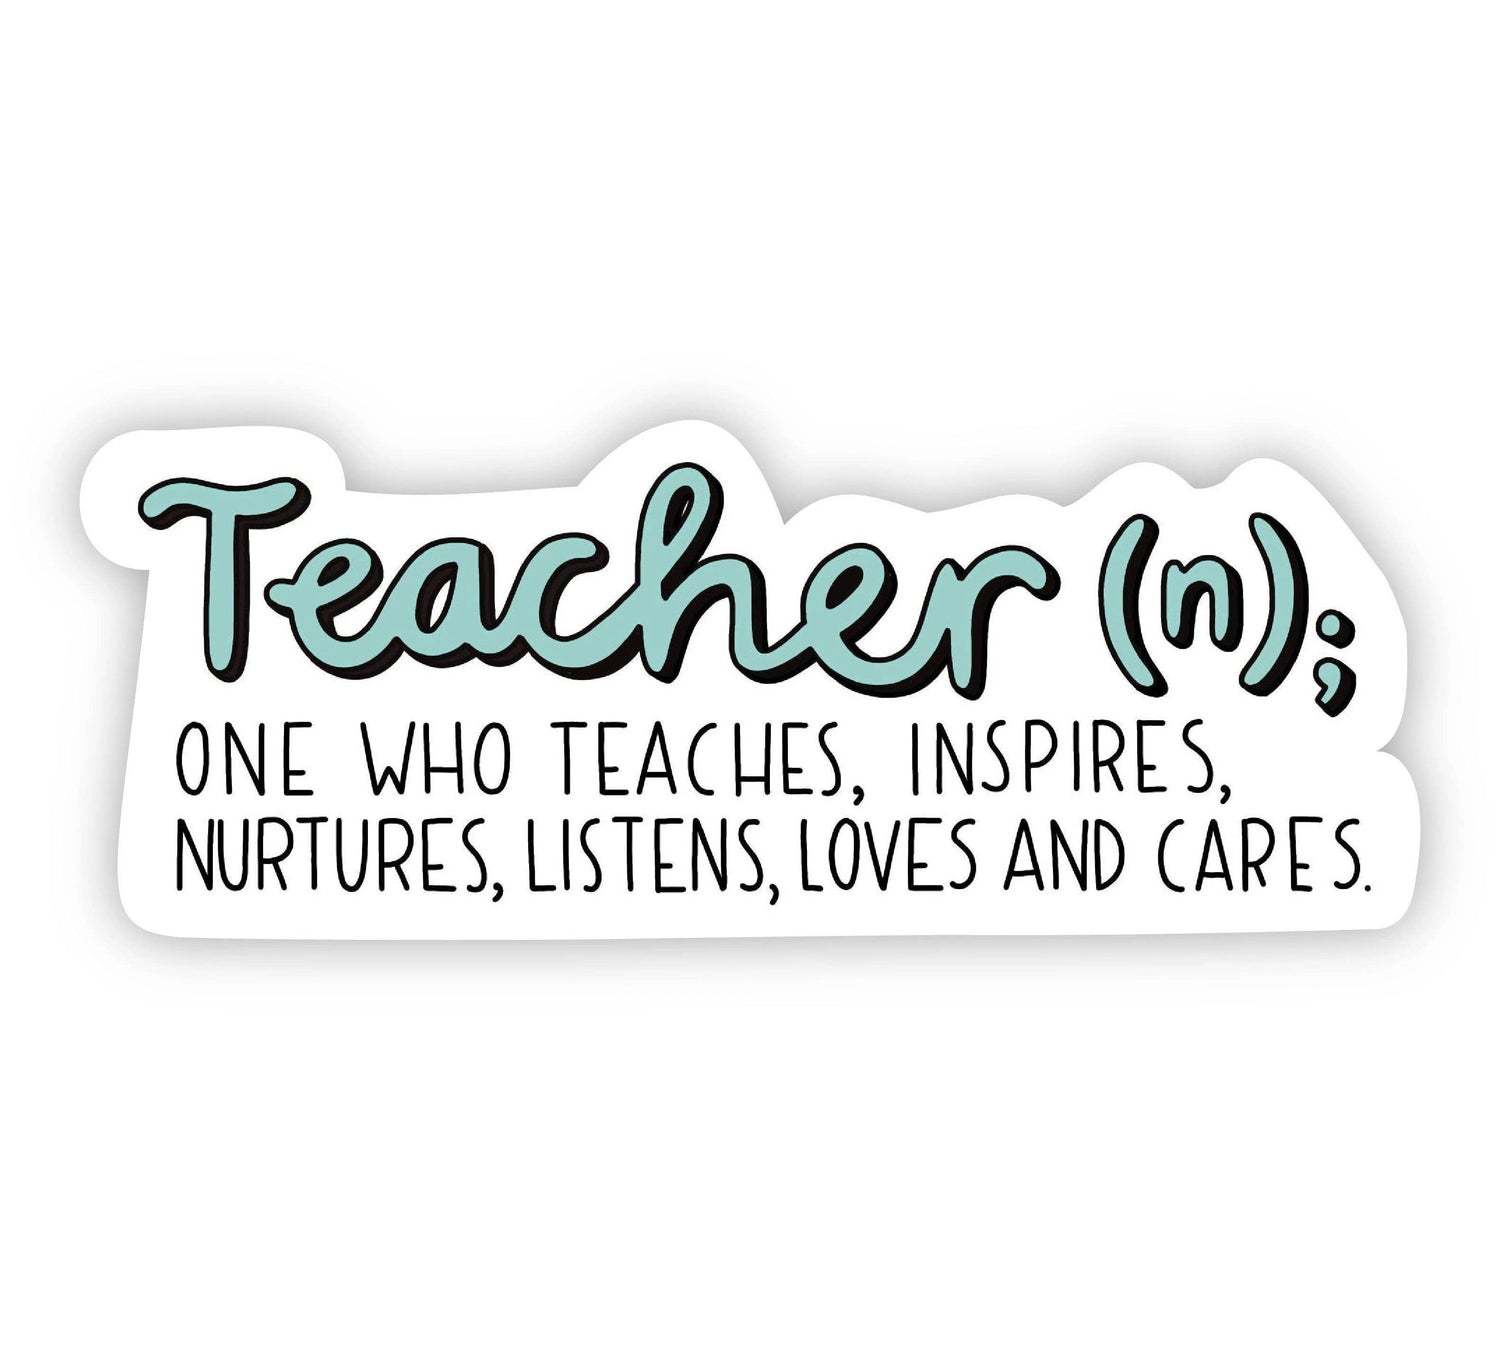 Teacher (n); is spelled in light blue cursive, below reads "one who teaches, inspires, nurtures, listens, loves and cares" in a thin font